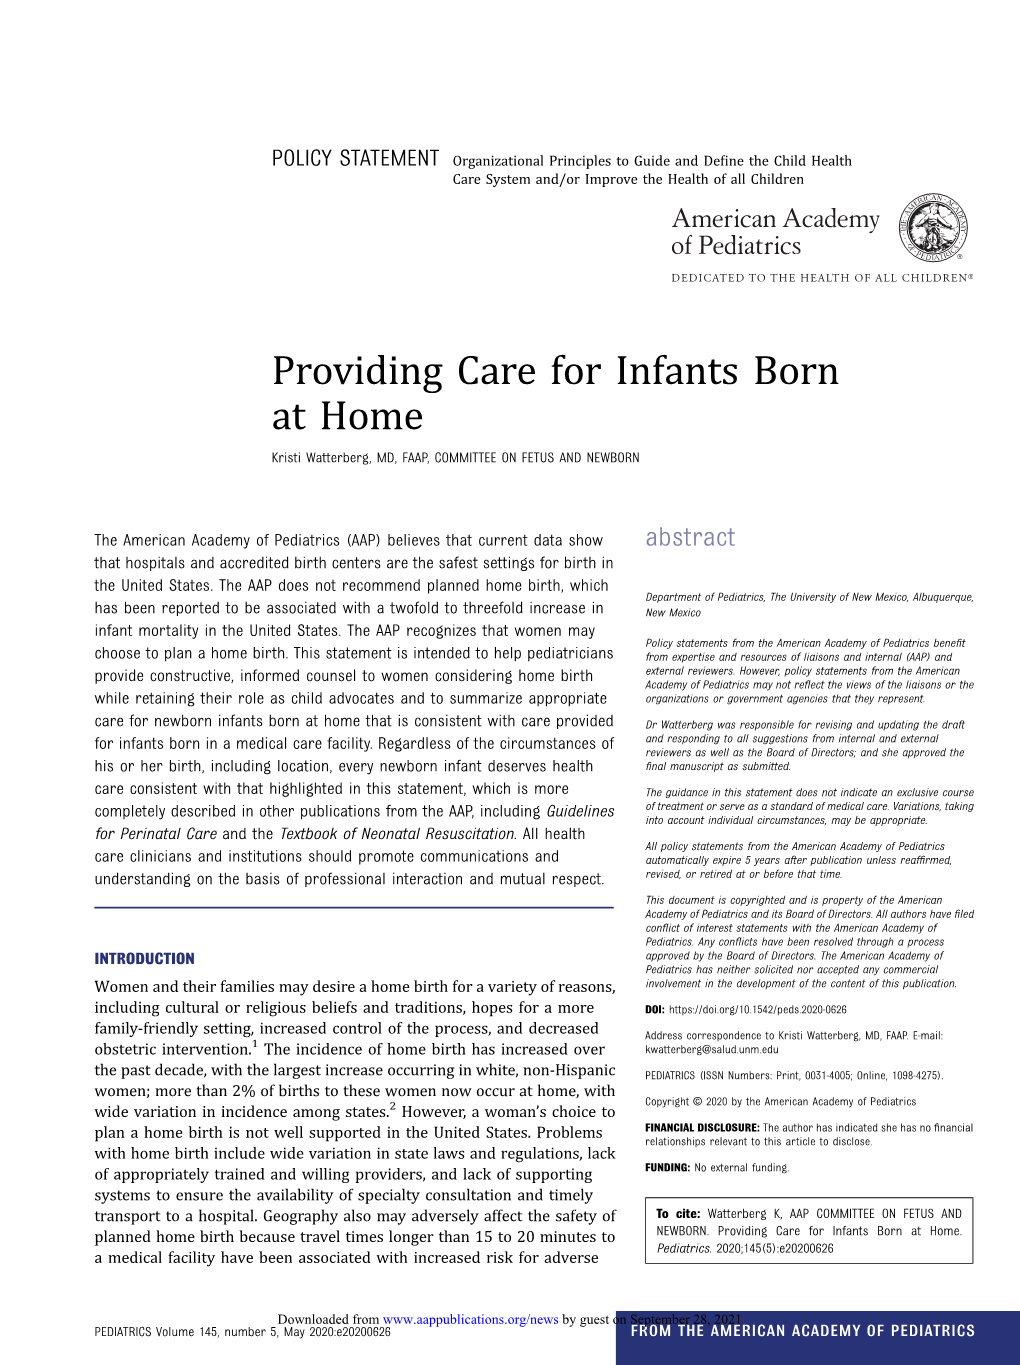 Providing Care for Infants Born at Home Kristi Watterberg, MD, FAAP, COMMITTEE on FETUS and NEWBORN